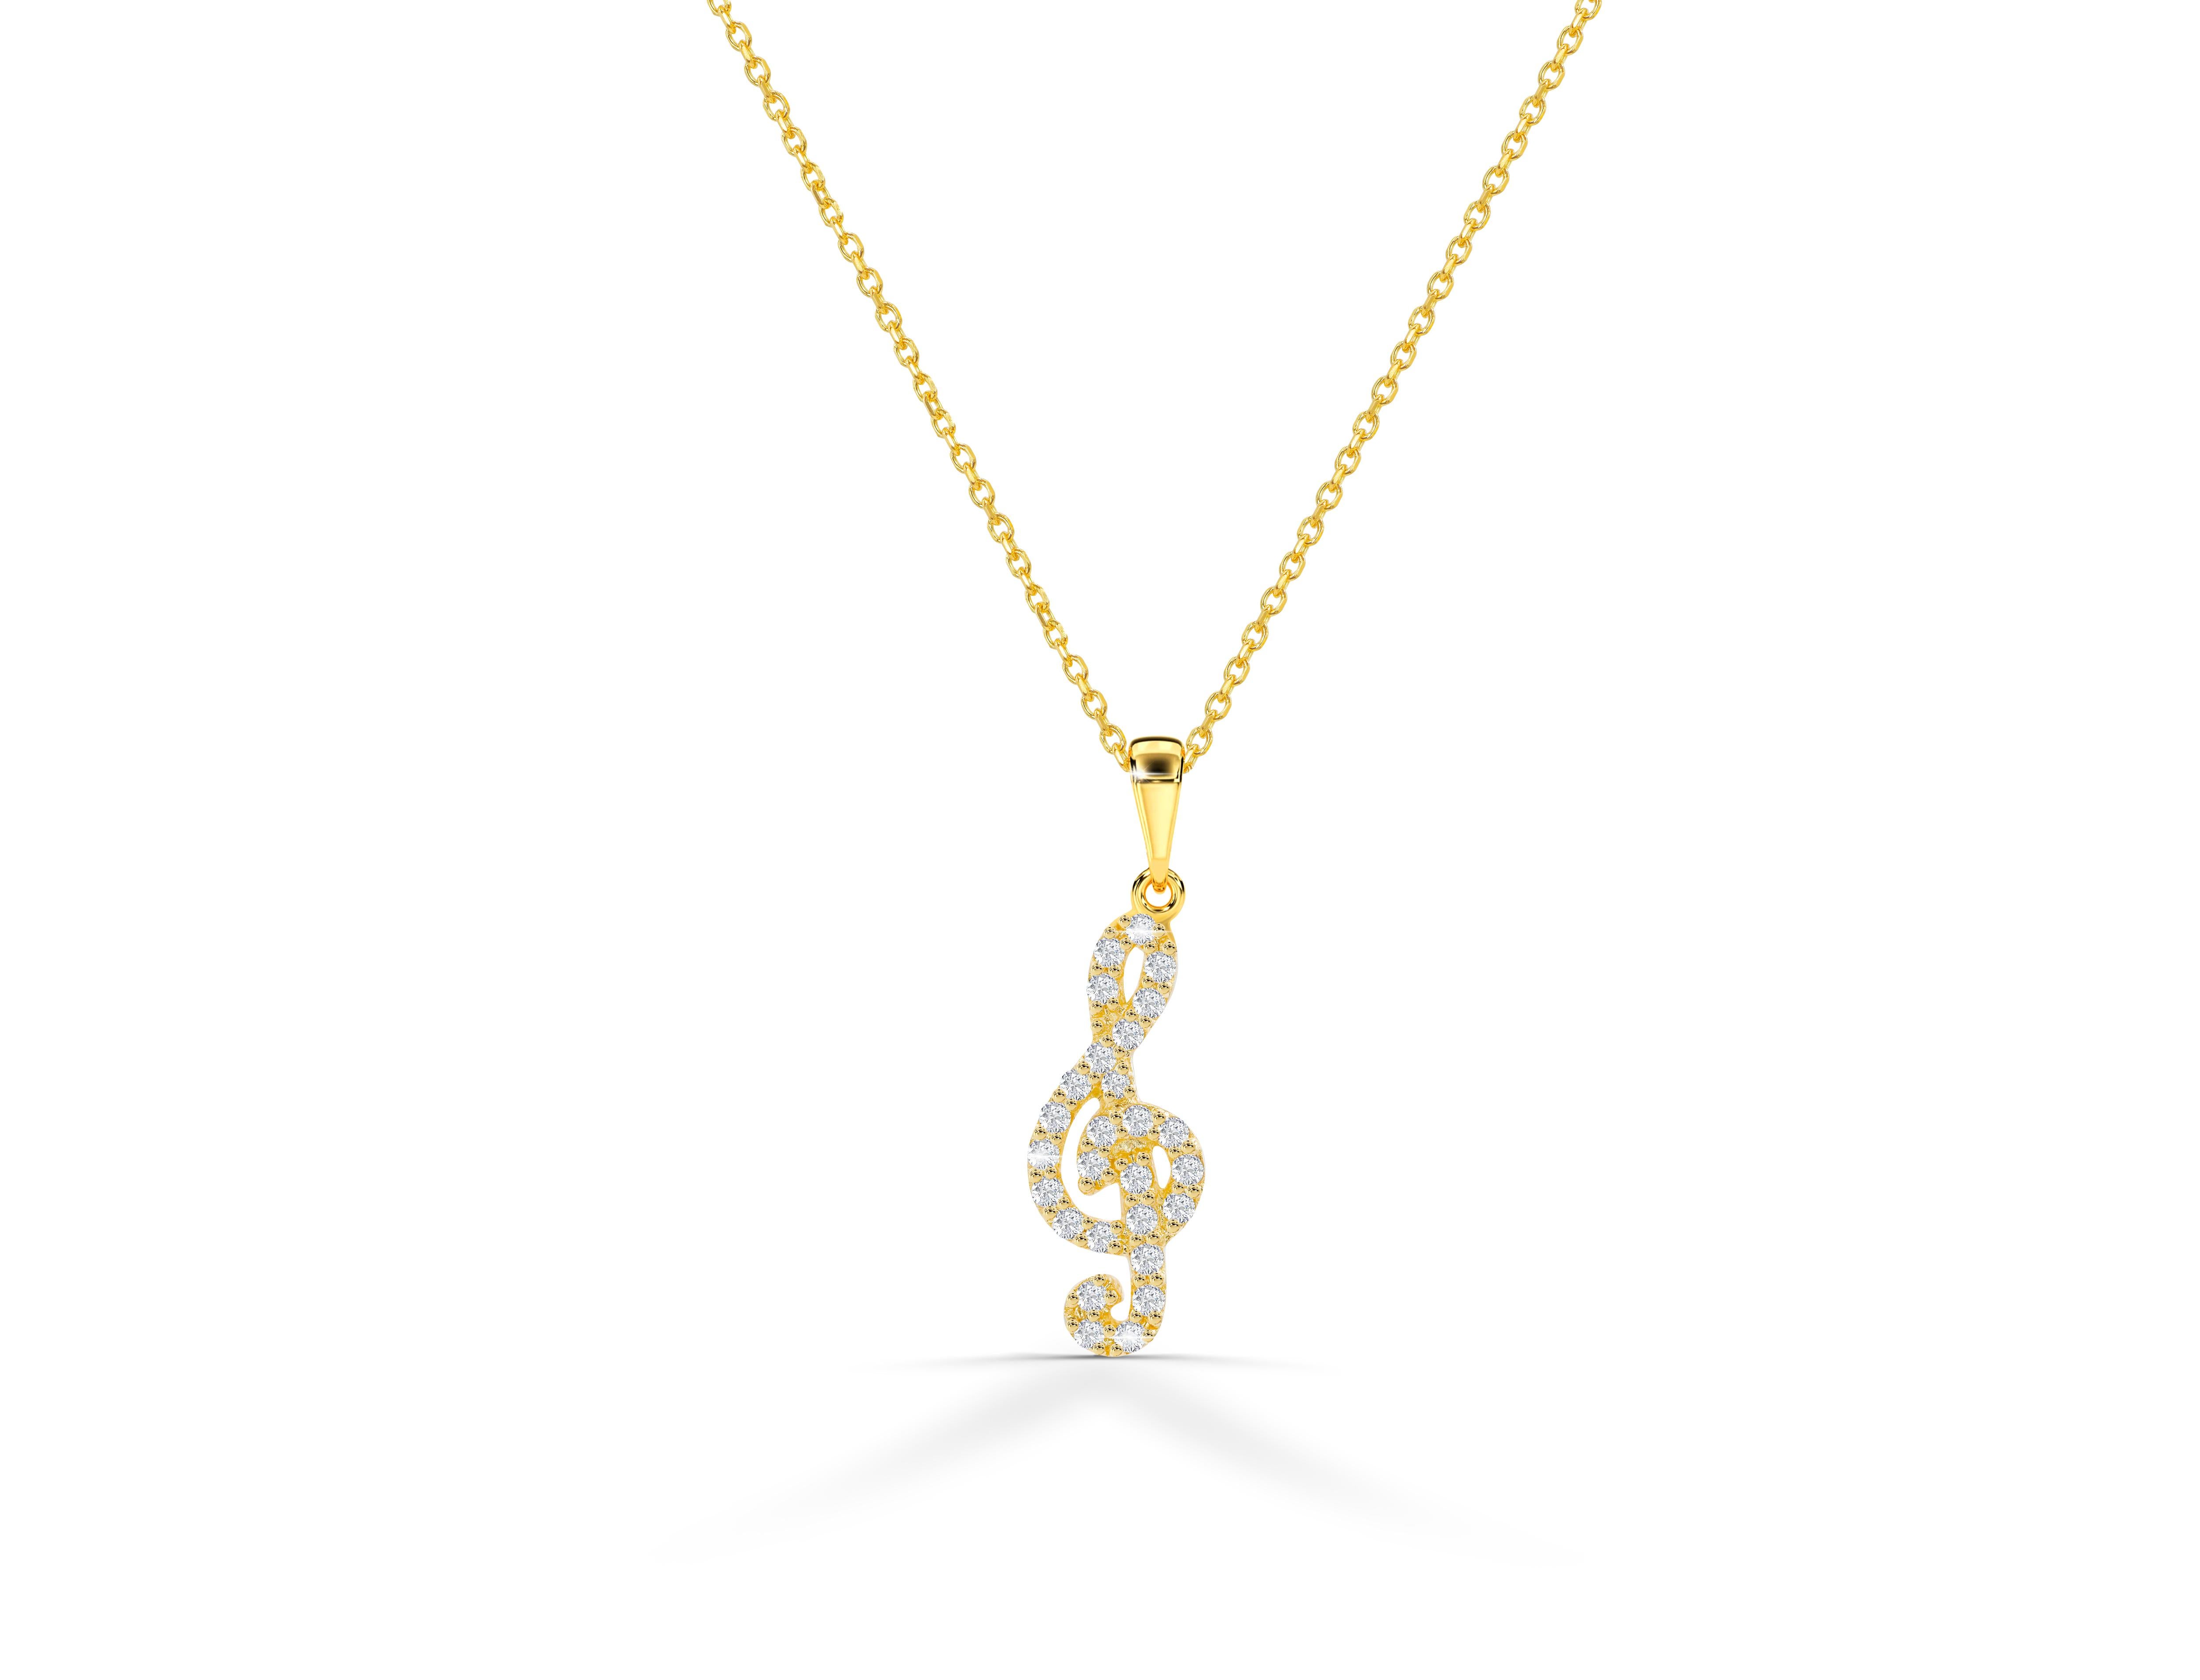 Diamond Music Note Necklace is made of 14k solid gold.
Available in three colors of gold: White Gold / Rose Gold / Yellow Gold.

Lightweight and gorgeous natural genuine round cut diamond. Each diamond is hand selected by me to ensure quality and